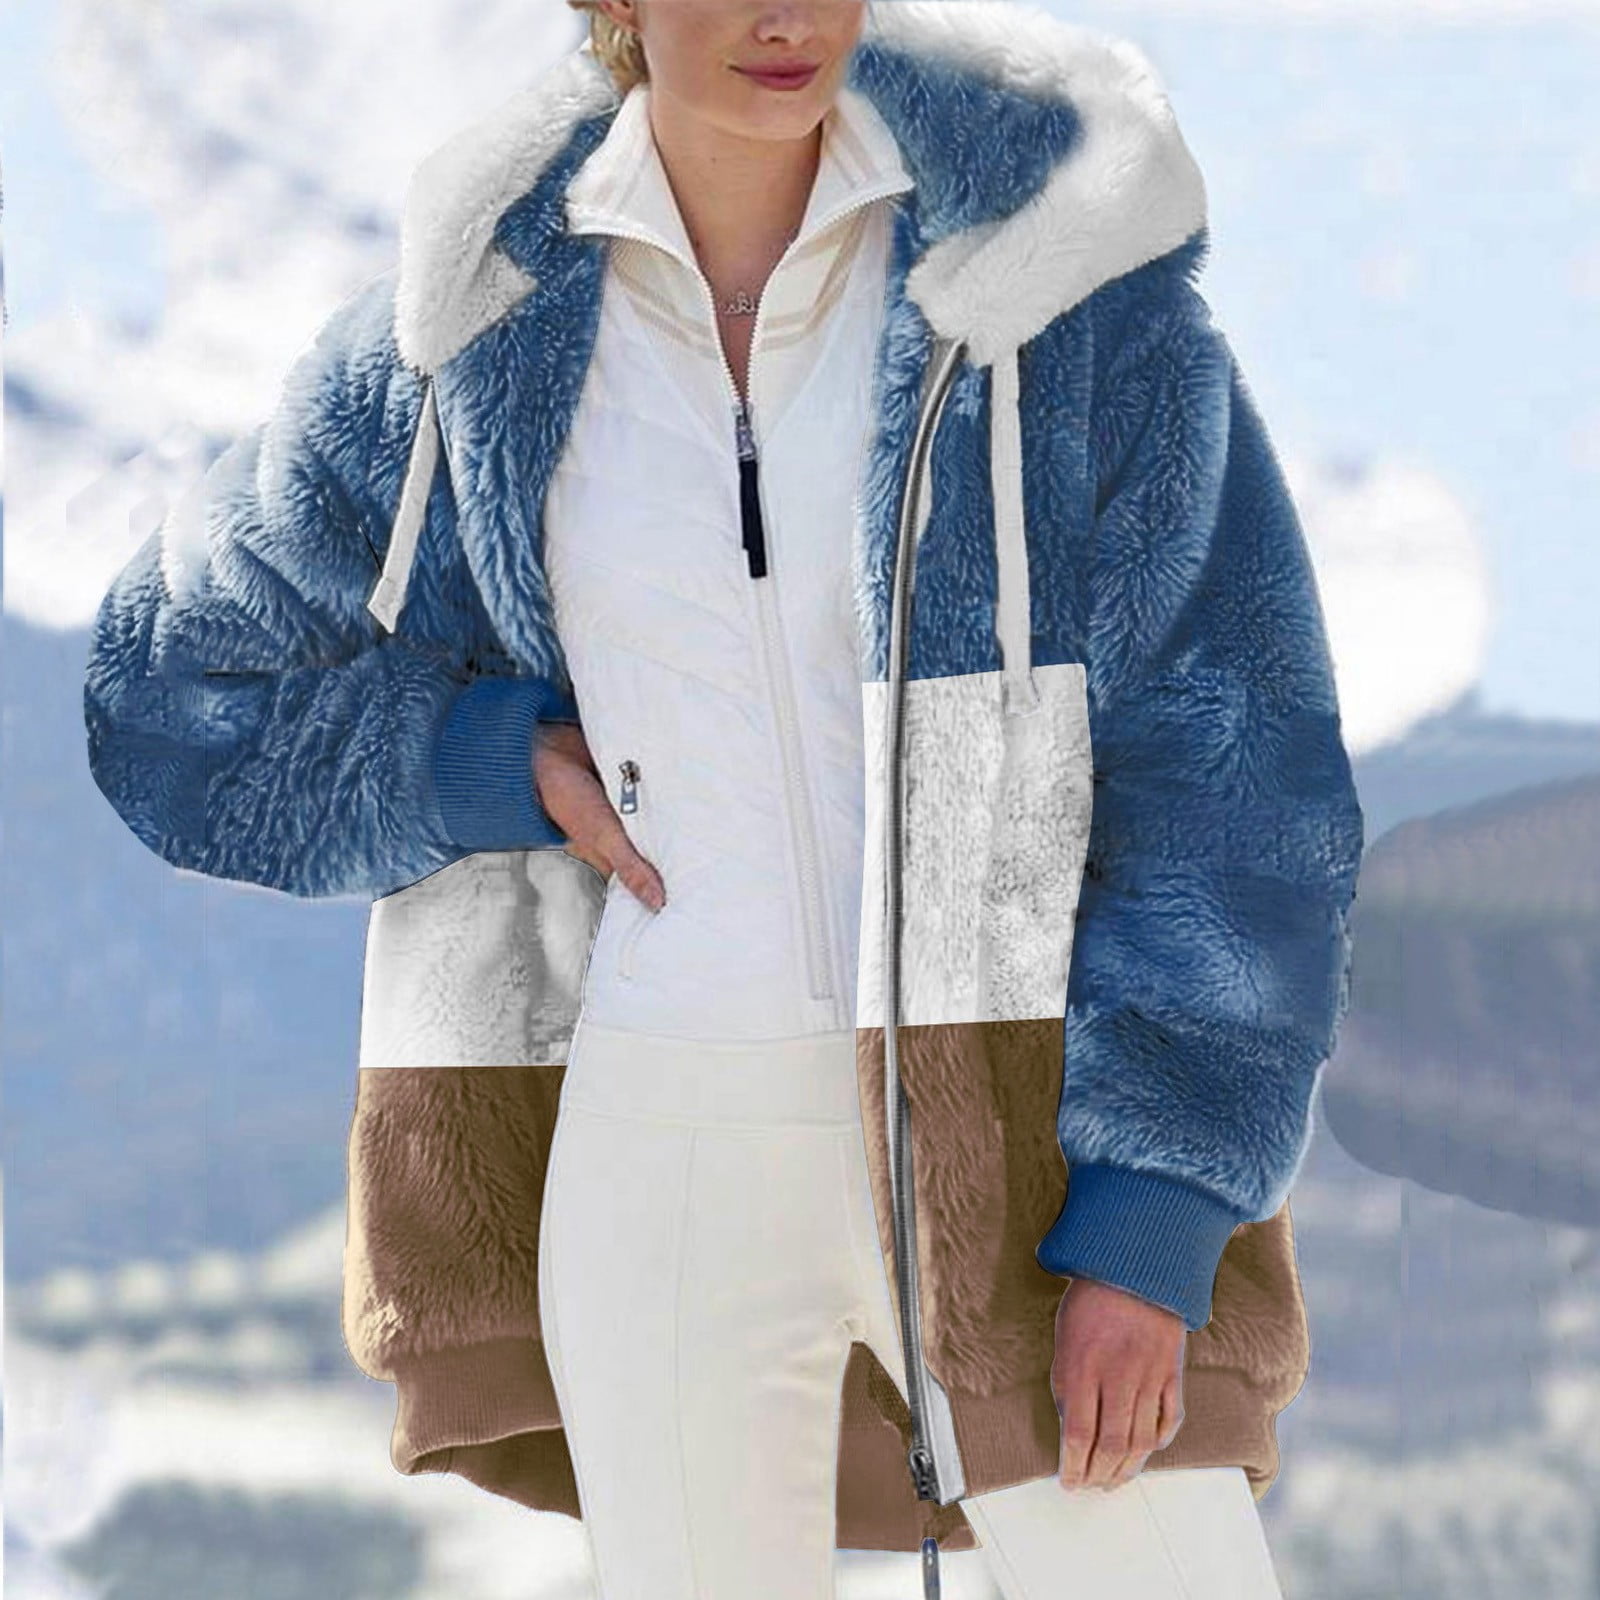 50% Off Clear! SHOPESSA Fashion Womens Warm Faux Coat Jacket Winter Zipper  Long Sleeve Outerwear On Clearance Early Access Deals Gifts